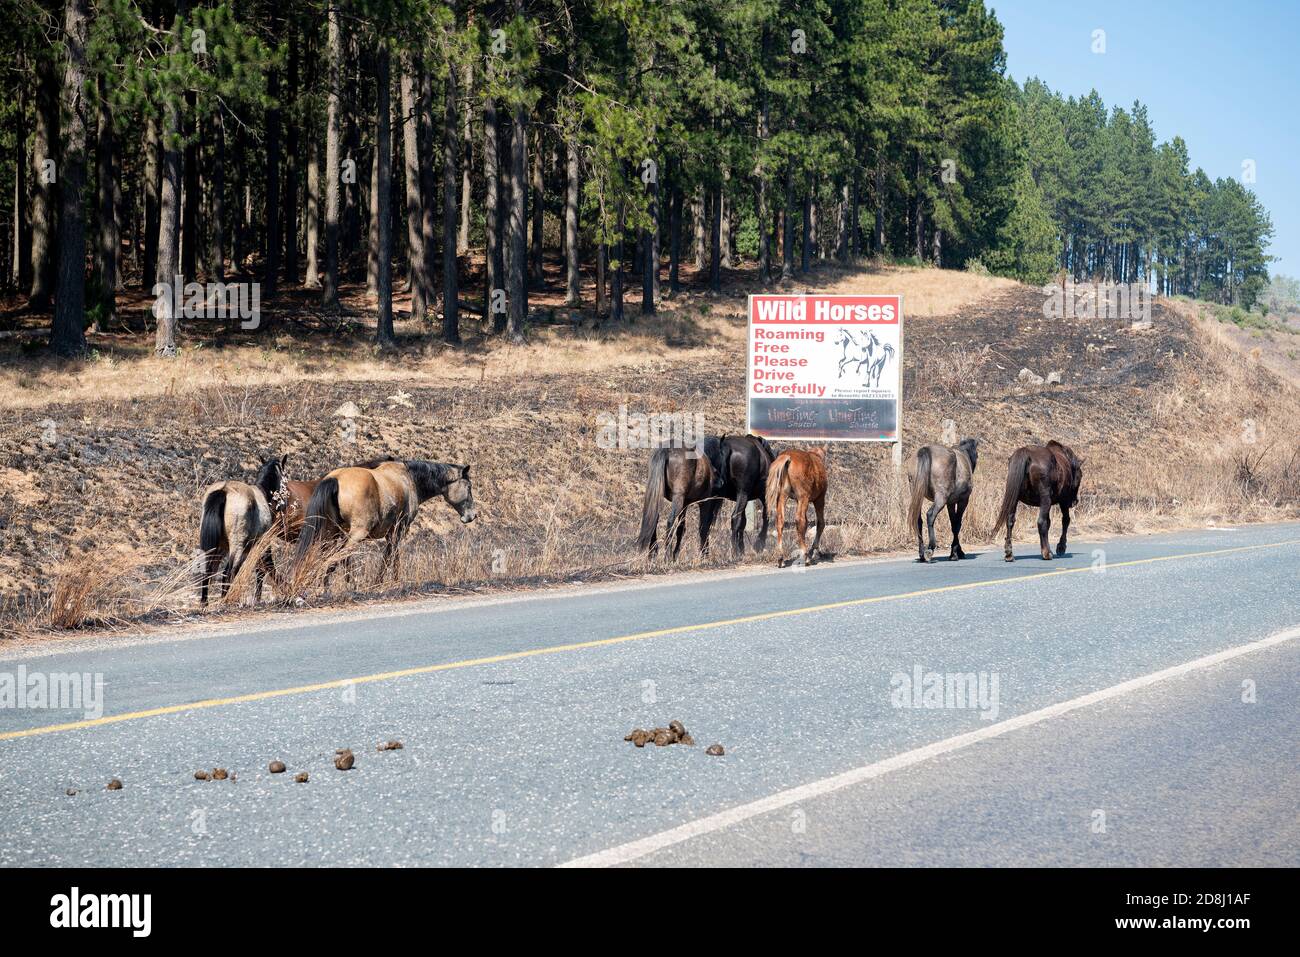 A small group of wild horses walking past the wild horses sign outside Kaapsehoop Stock Photo